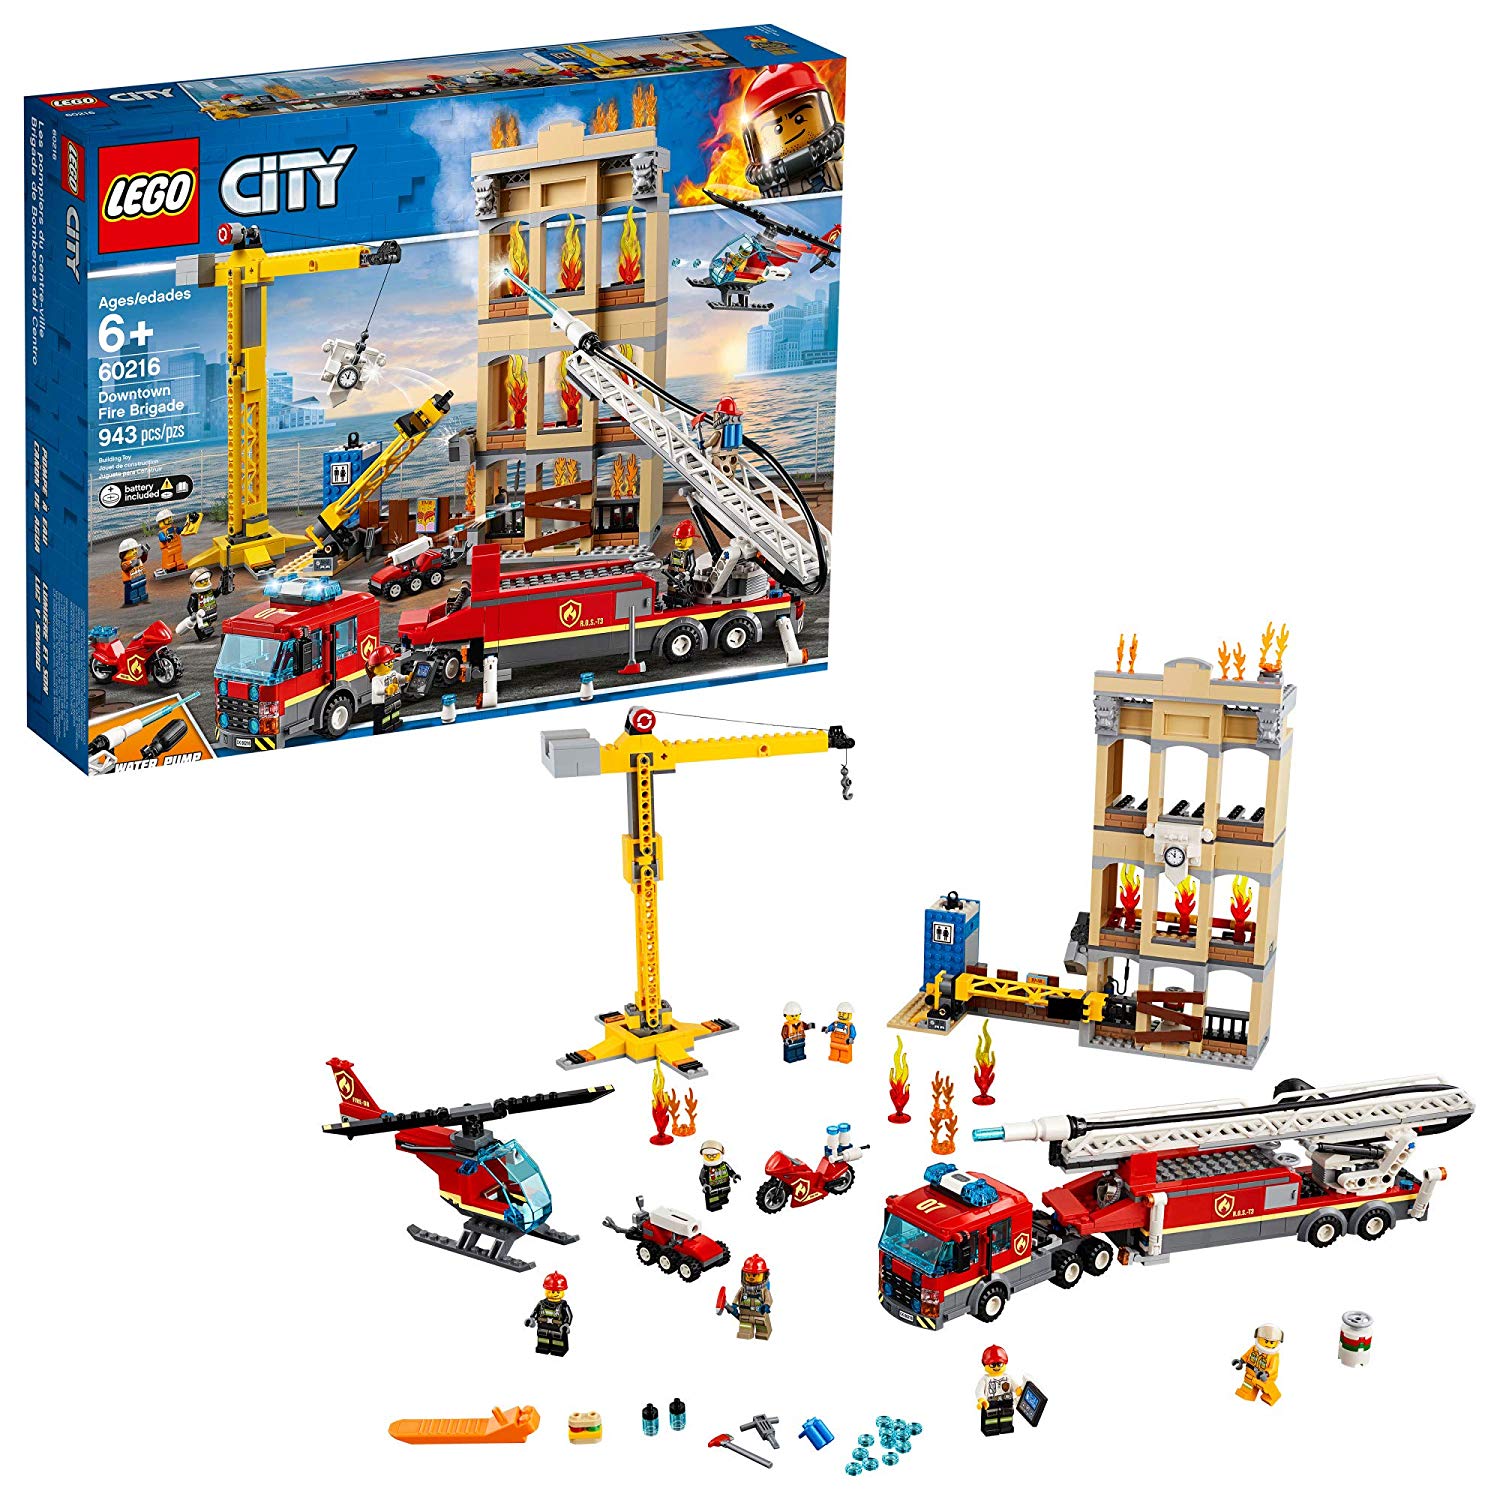 LEGO City Fire Brigade in the City 60216 (943 Pieces) with Light & Sound - 